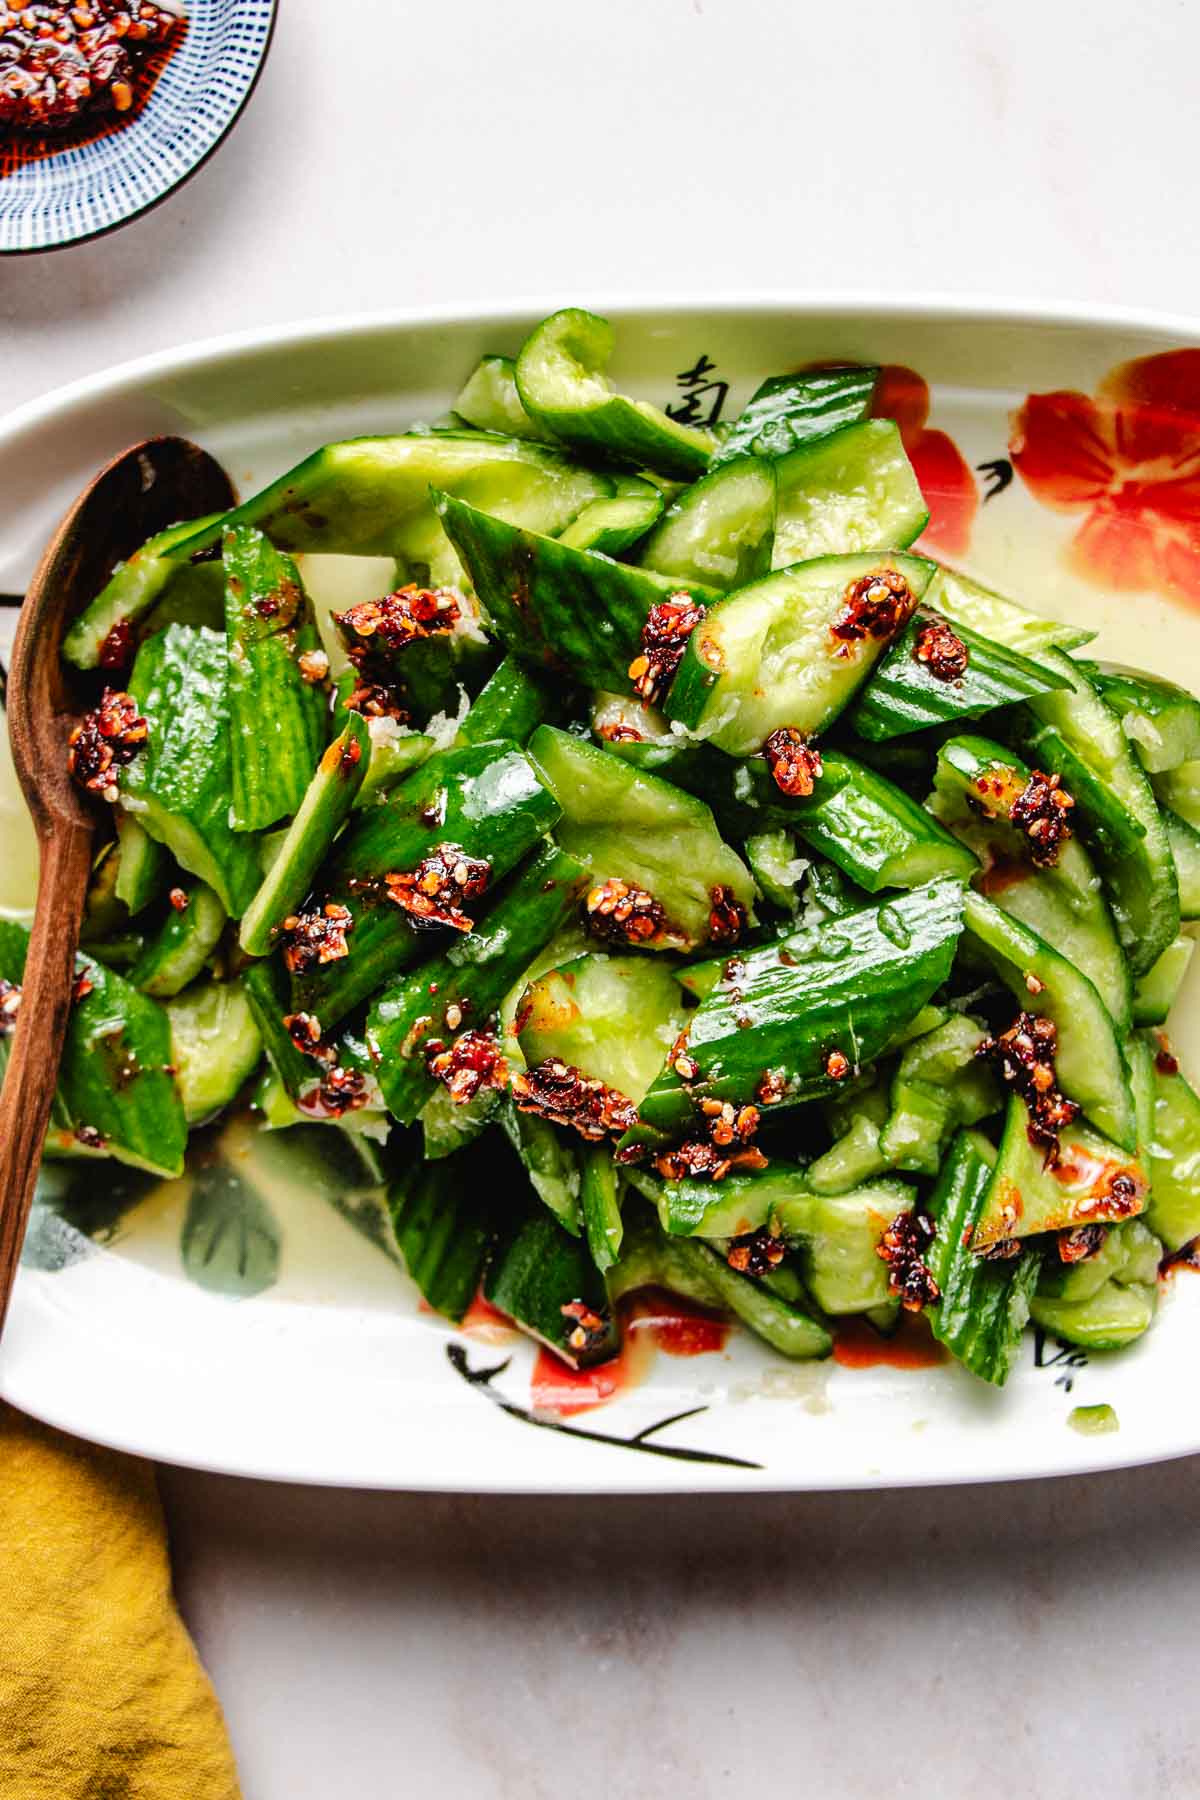 Paper-thin vegetables make for better, more creative salads